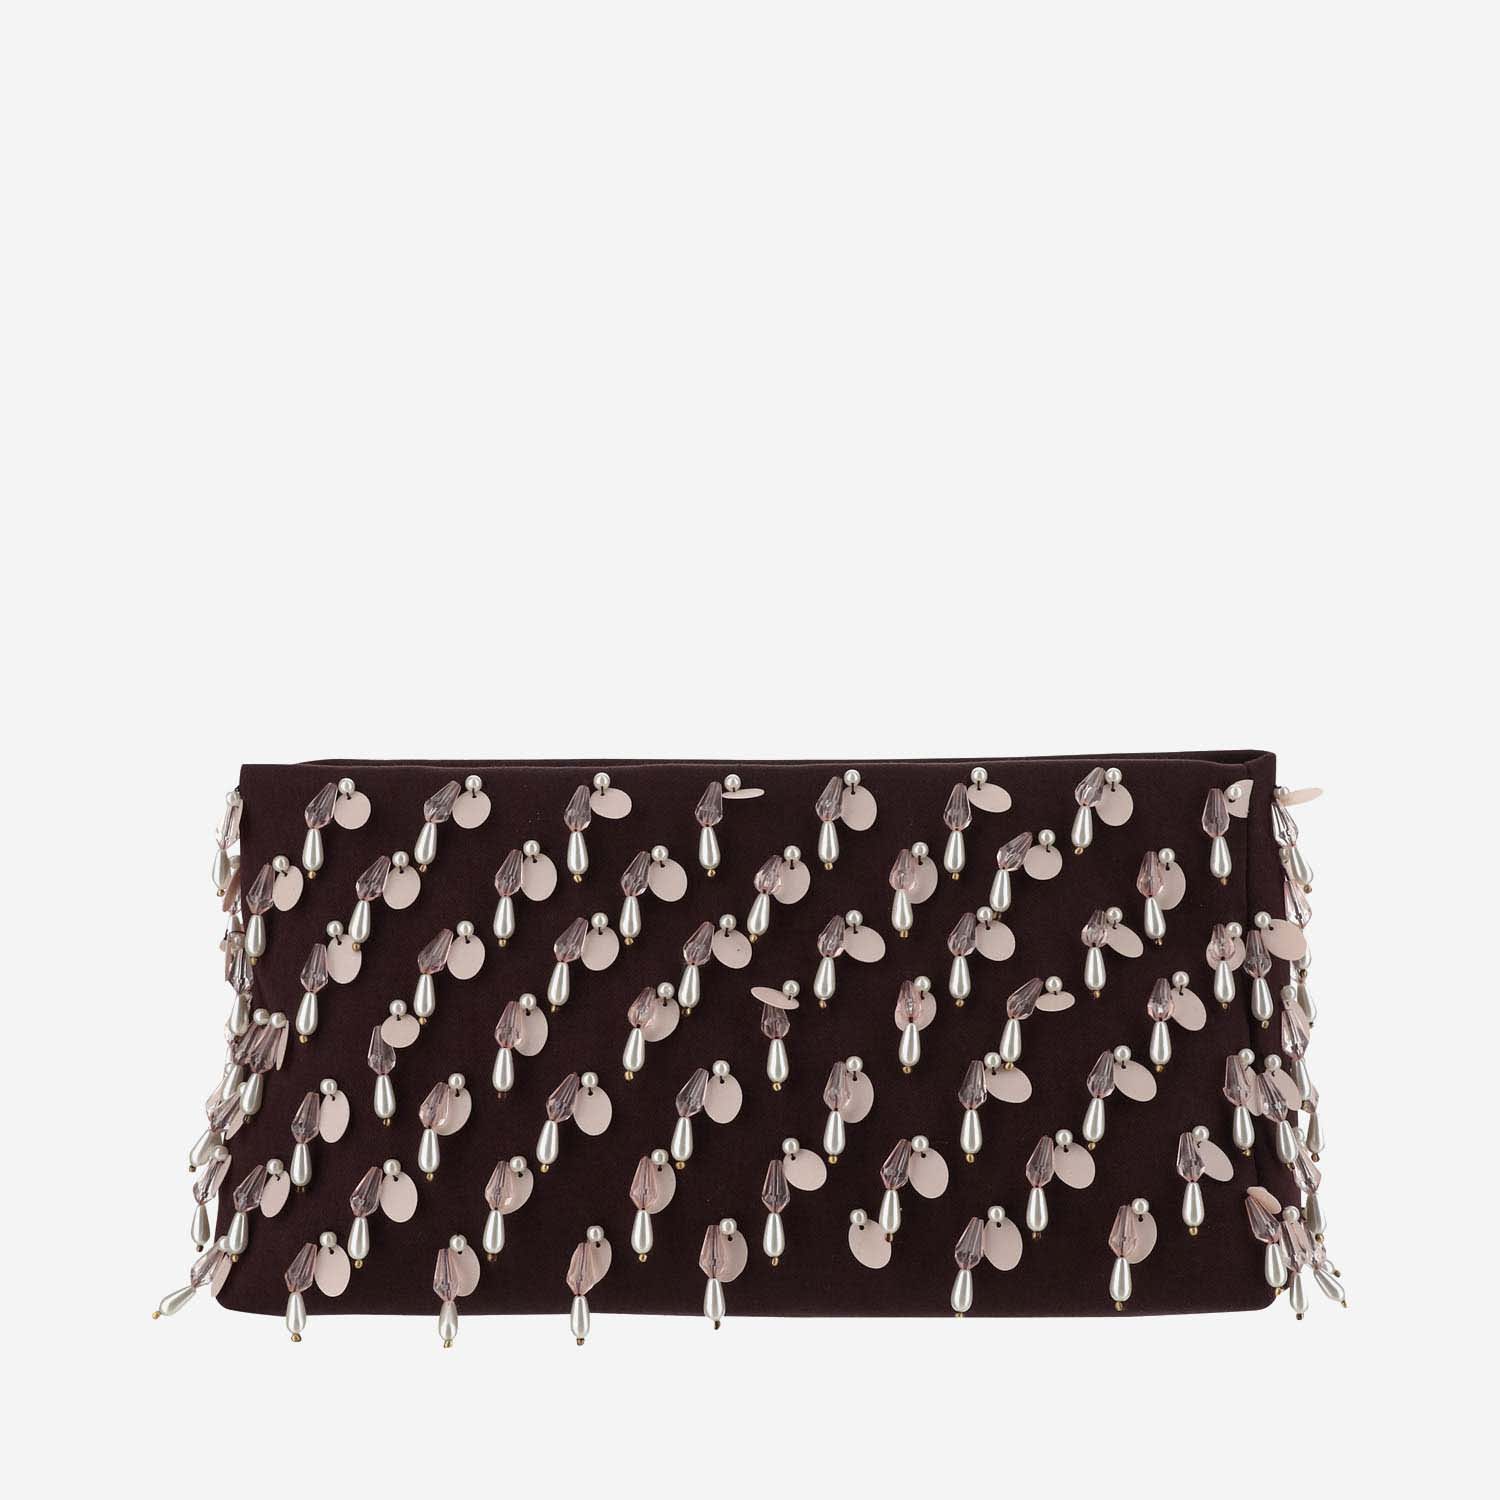 Cotton Clutch Bag With Beads